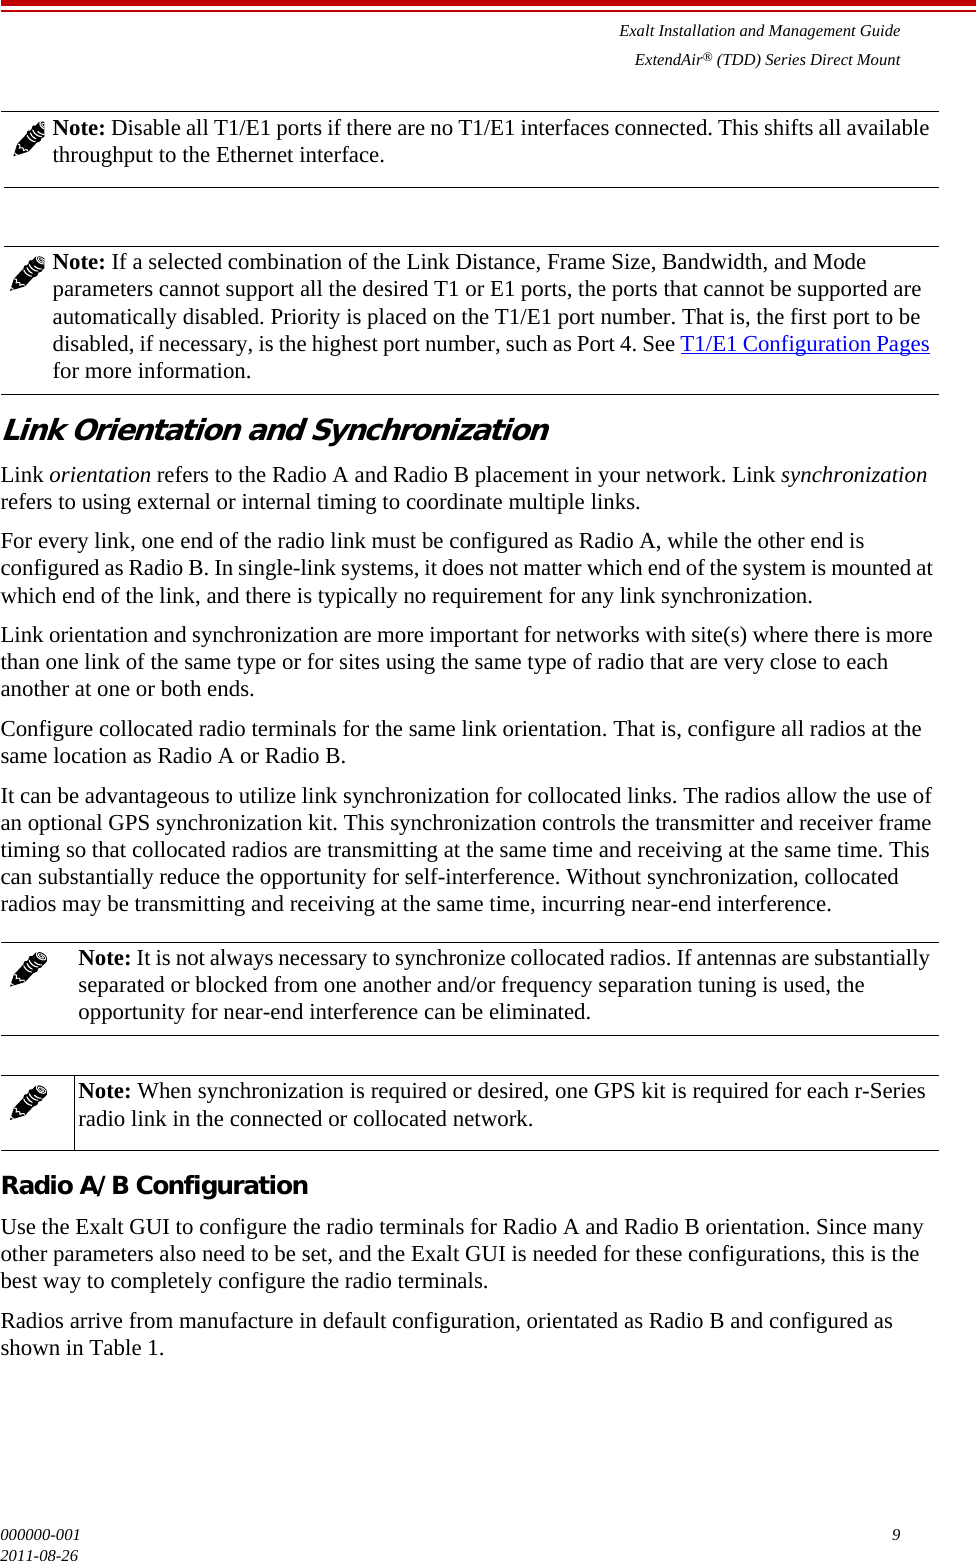 Exalt Installation and Management GuideExtendAir® (TDD) Series Direct Mount000000-001 92011-08-26Link Orientation and SynchronizationLink orientation refers to the Radio A and Radio B placement in your network. Link synchronization refers to using external or internal timing to coordinate multiple links.For every link, one end of the radio link must be configured as Radio A, while the other end is configured as Radio B. In single-link systems, it does not matter which end of the system is mounted at which end of the link, and there is typically no requirement for any link synchronization.Link orientation and synchronization are more important for networks with site(s) where there is more than one link of the same type or for sites using the same type of radio that are very close to each another at one or both ends. Configure collocated radio terminals for the same link orientation. That is, configure all radios at the same location as Radio A or Radio B. It can be advantageous to utilize link synchronization for collocated links. The radios allow the use of an optional GPS synchronization kit. This synchronization controls the transmitter and receiver frame timing so that collocated radios are transmitting at the same time and receiving at the same time. This can substantially reduce the opportunity for self-interference. Without synchronization, collocated radios may be transmitting and receiving at the same time, incurring near-end interference. Radio A/B ConfigurationUse the Exalt GUI to configure the radio terminals for Radio A and Radio B orientation. Since many other parameters also need to be set, and the Exalt GUI is needed for these configurations, this is the best way to completely configure the radio terminals.Radios arrive from manufacture in default configuration, orientated as Radio B and configured as shown in Table 1.Note: Disable all T1/E1 ports if there are no T1/E1 interfaces connected. This shifts all available throughput to the Ethernet interface.Note: If a selected combination of the Link Distance, Frame Size, Bandwidth, and Mode parameters cannot support all the desired T1 or E1 ports, the ports that cannot be supported are automatically disabled. Priority is placed on the T1/E1 port number. That is, the first port to be disabled, if necessary, is the highest port number, such as Port 4. See T1/E1 Configuration Pages for more information.Note: It is not always necessary to synchronize collocated radios. If antennas are substantially separated or blocked from one another and/or frequency separation tuning is used, the opportunity for near-end interference can be eliminated.Note: When synchronization is required or desired, one GPS kit is required for each r-Series radio link in the connected or collocated network. 